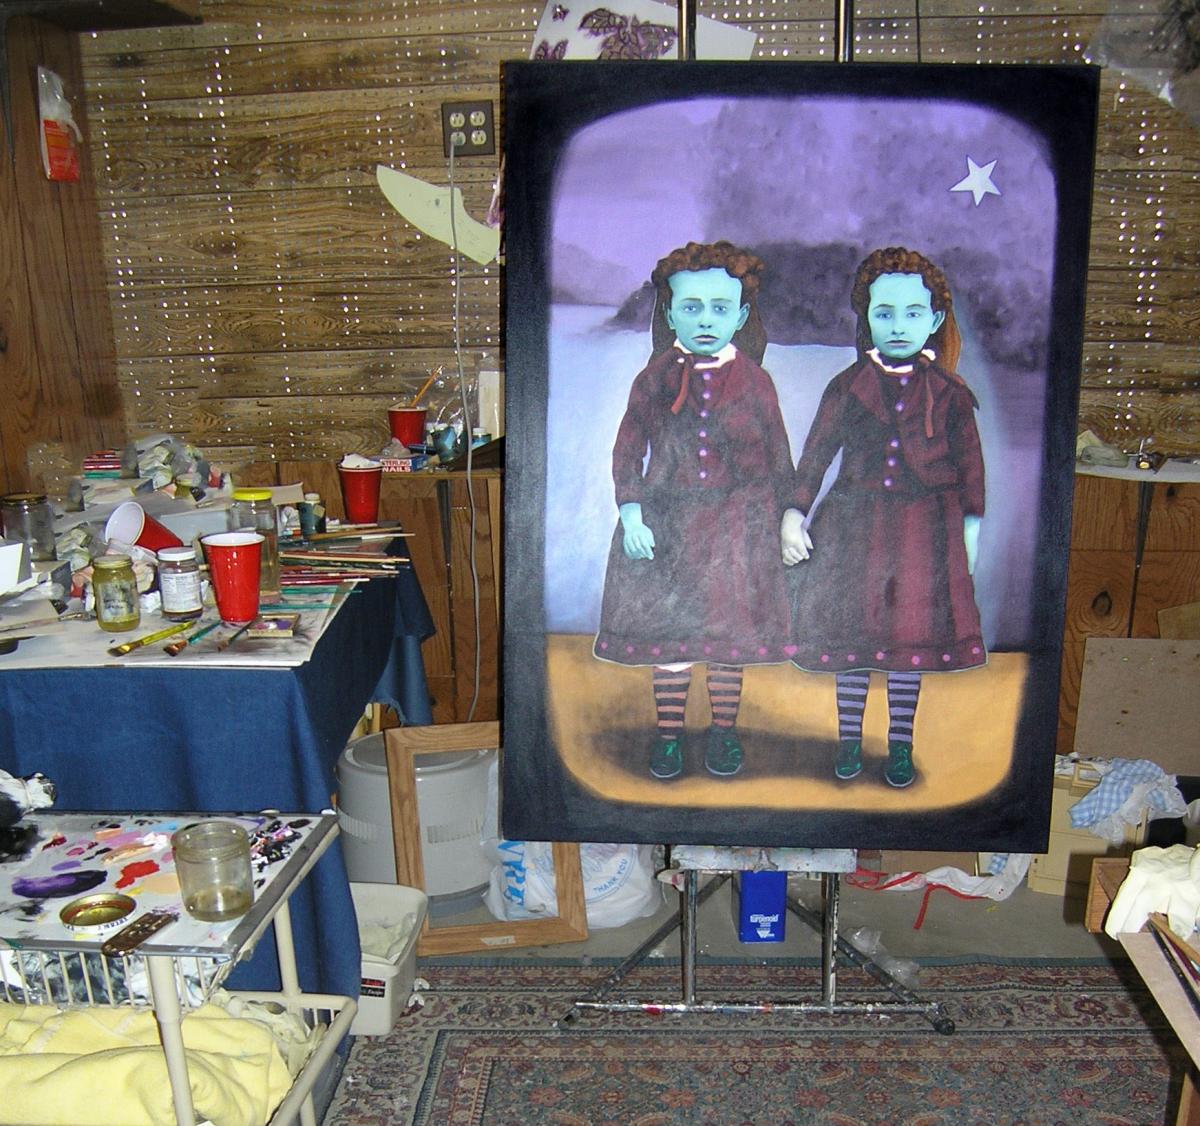 The painting upon completion within a less than tidy studio, circa May 2004.